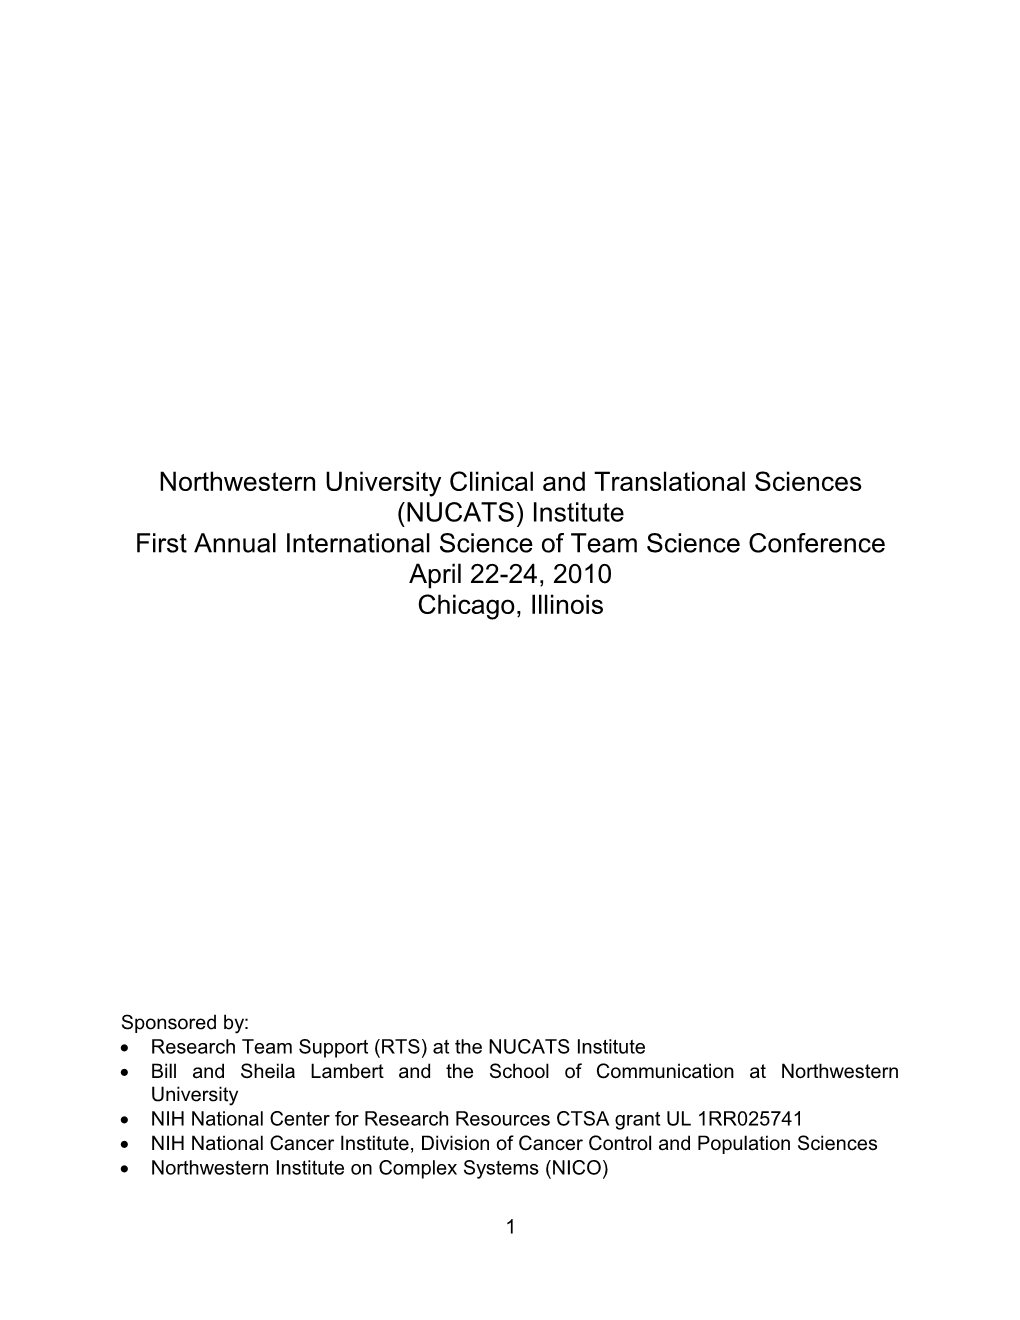 Northwestern University Clinical and Translational Sciences (NUCATS) Institute